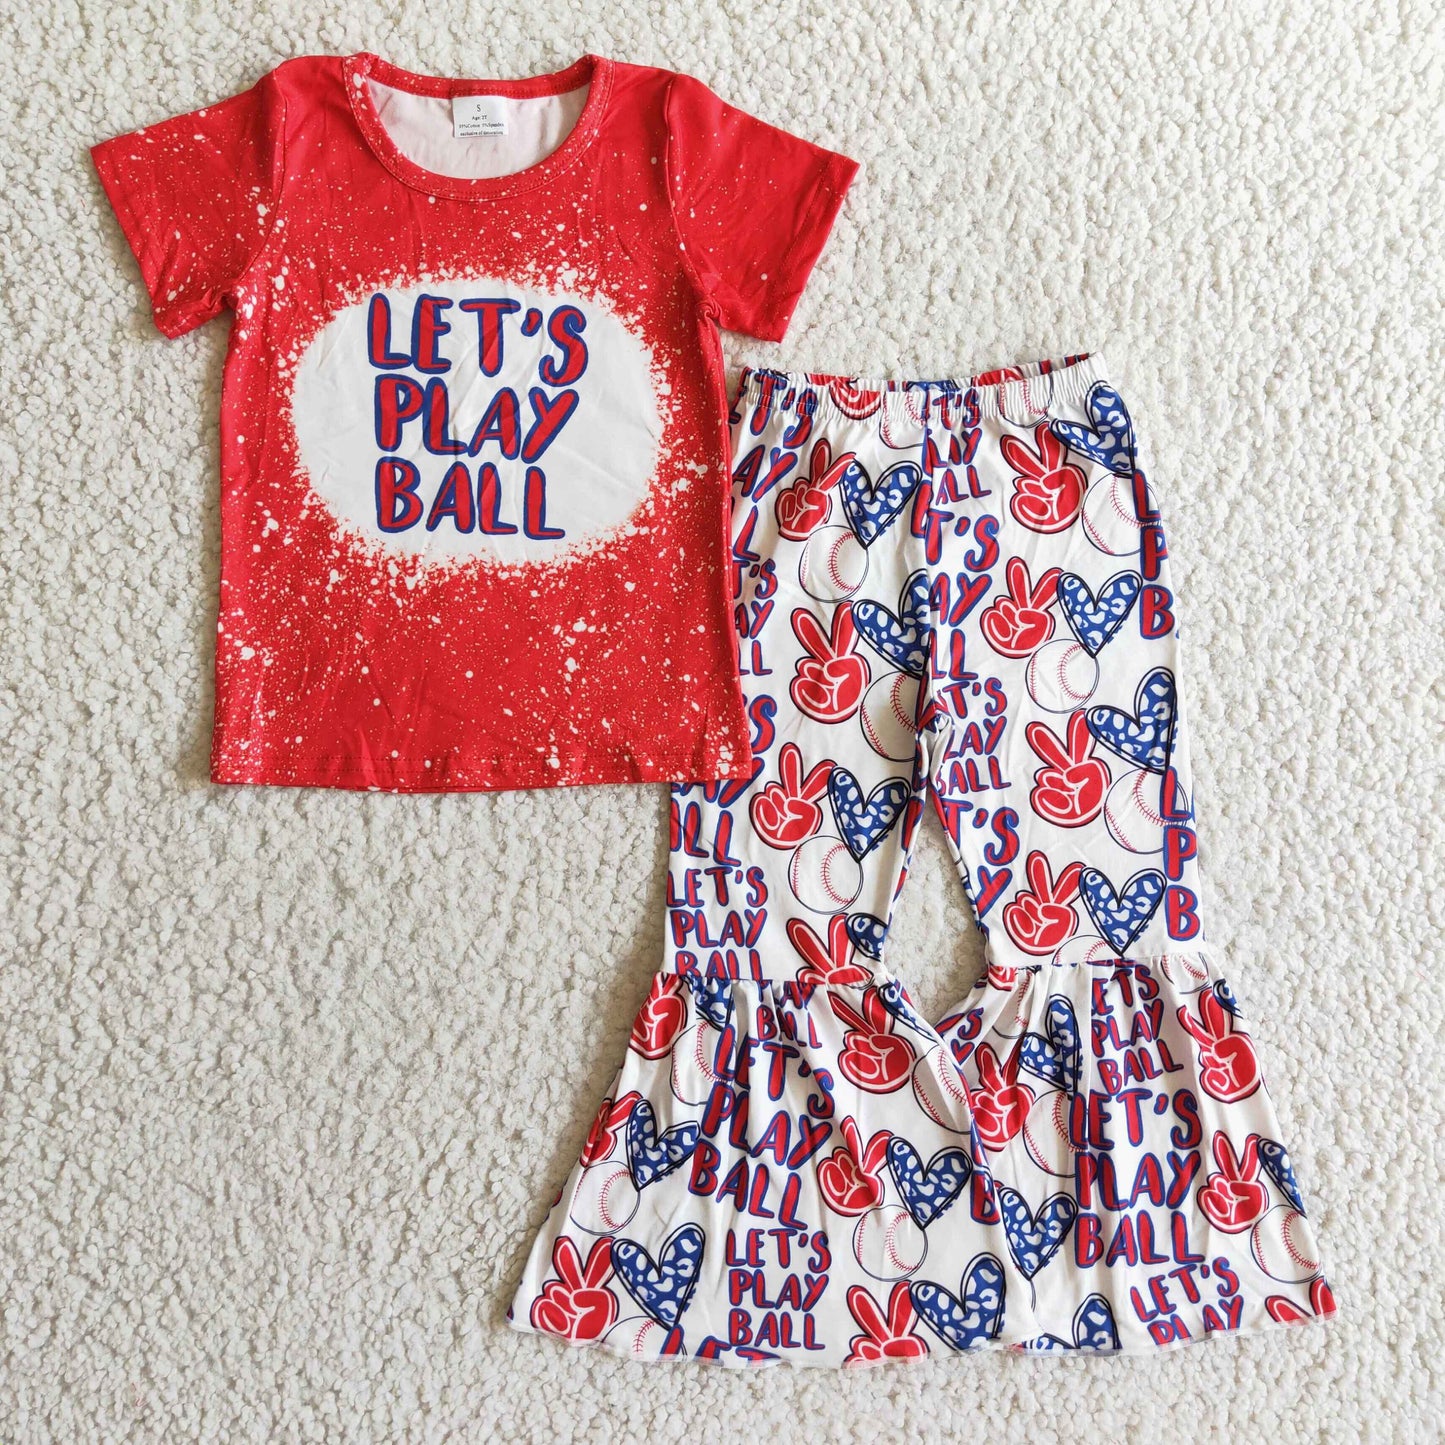 Let's play ball girls boutique game clothing